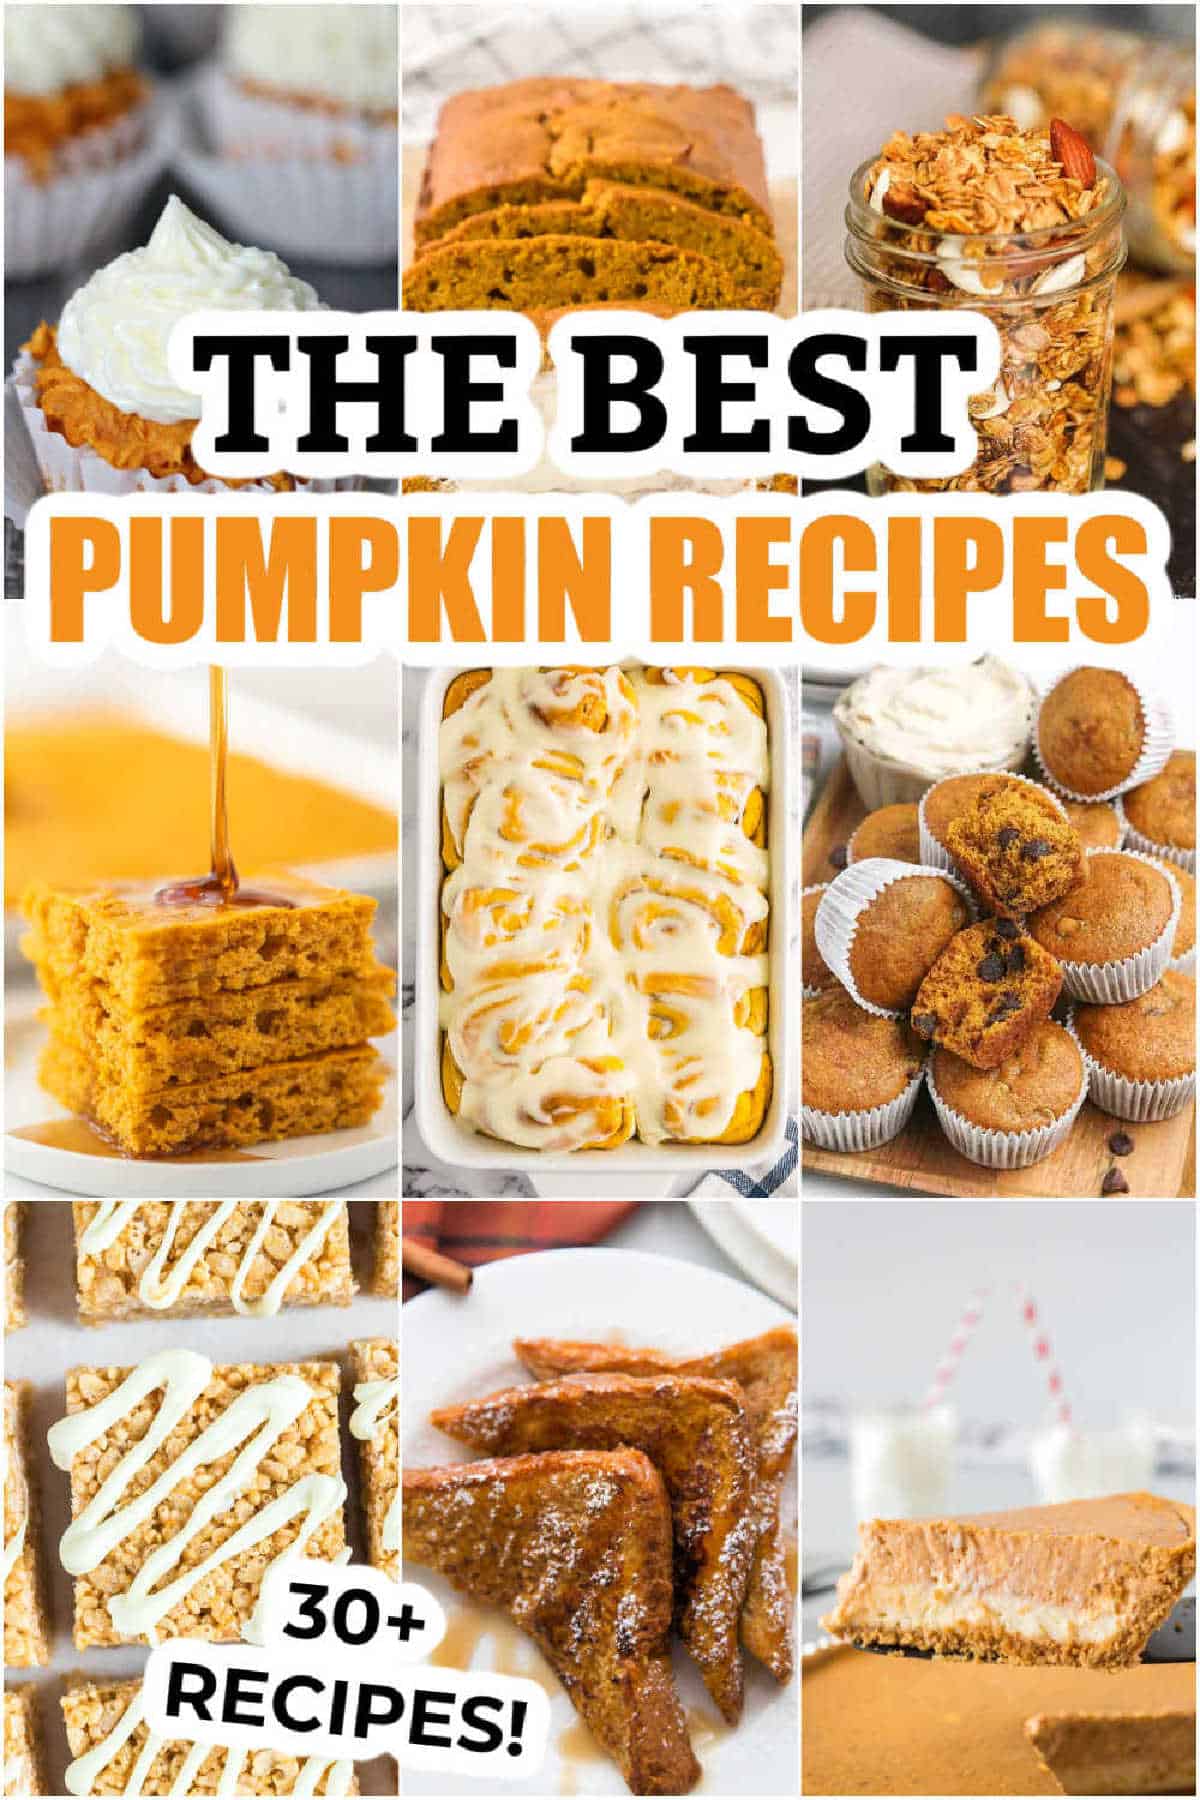 If you love all things pumpkin, we have all of the easiest and the best pumpkin recipes for you to try! Find over 30 easy pumpkin recipes that are perfect for Fall baking. These recipes includes healthy recipes, savory recipes and sweet dessert recipes that everyone will love! #eatingonadime #pumpkinrecipes #fallrecipes #pumpkin 
